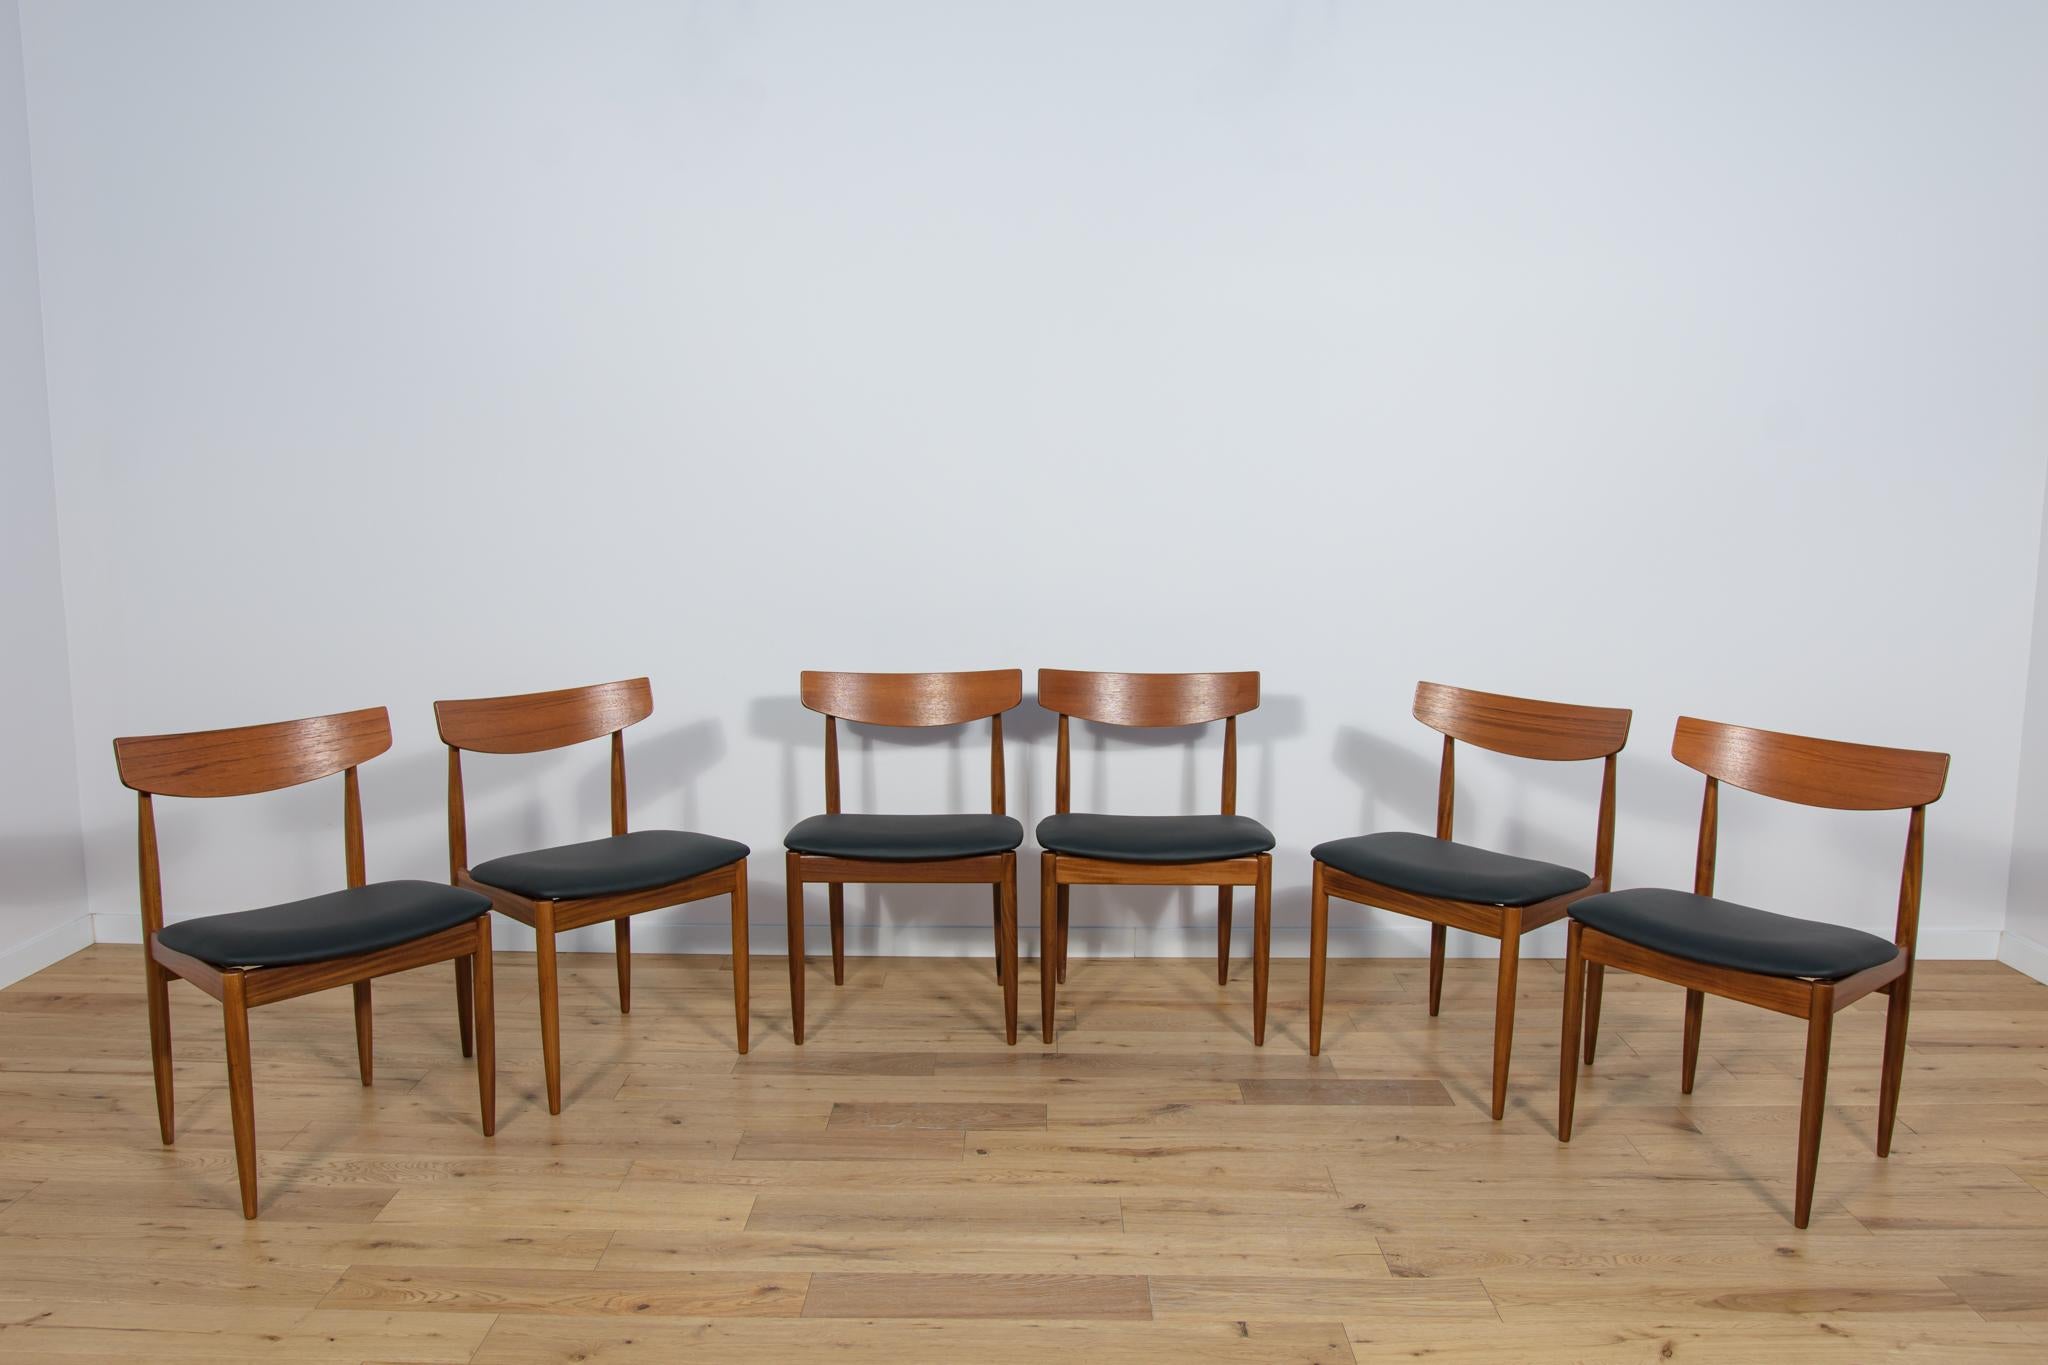 Woodwork Mid-Century Dining Chairs in Teak by Ib Kofod Larsen for G-Plan, 1960s.